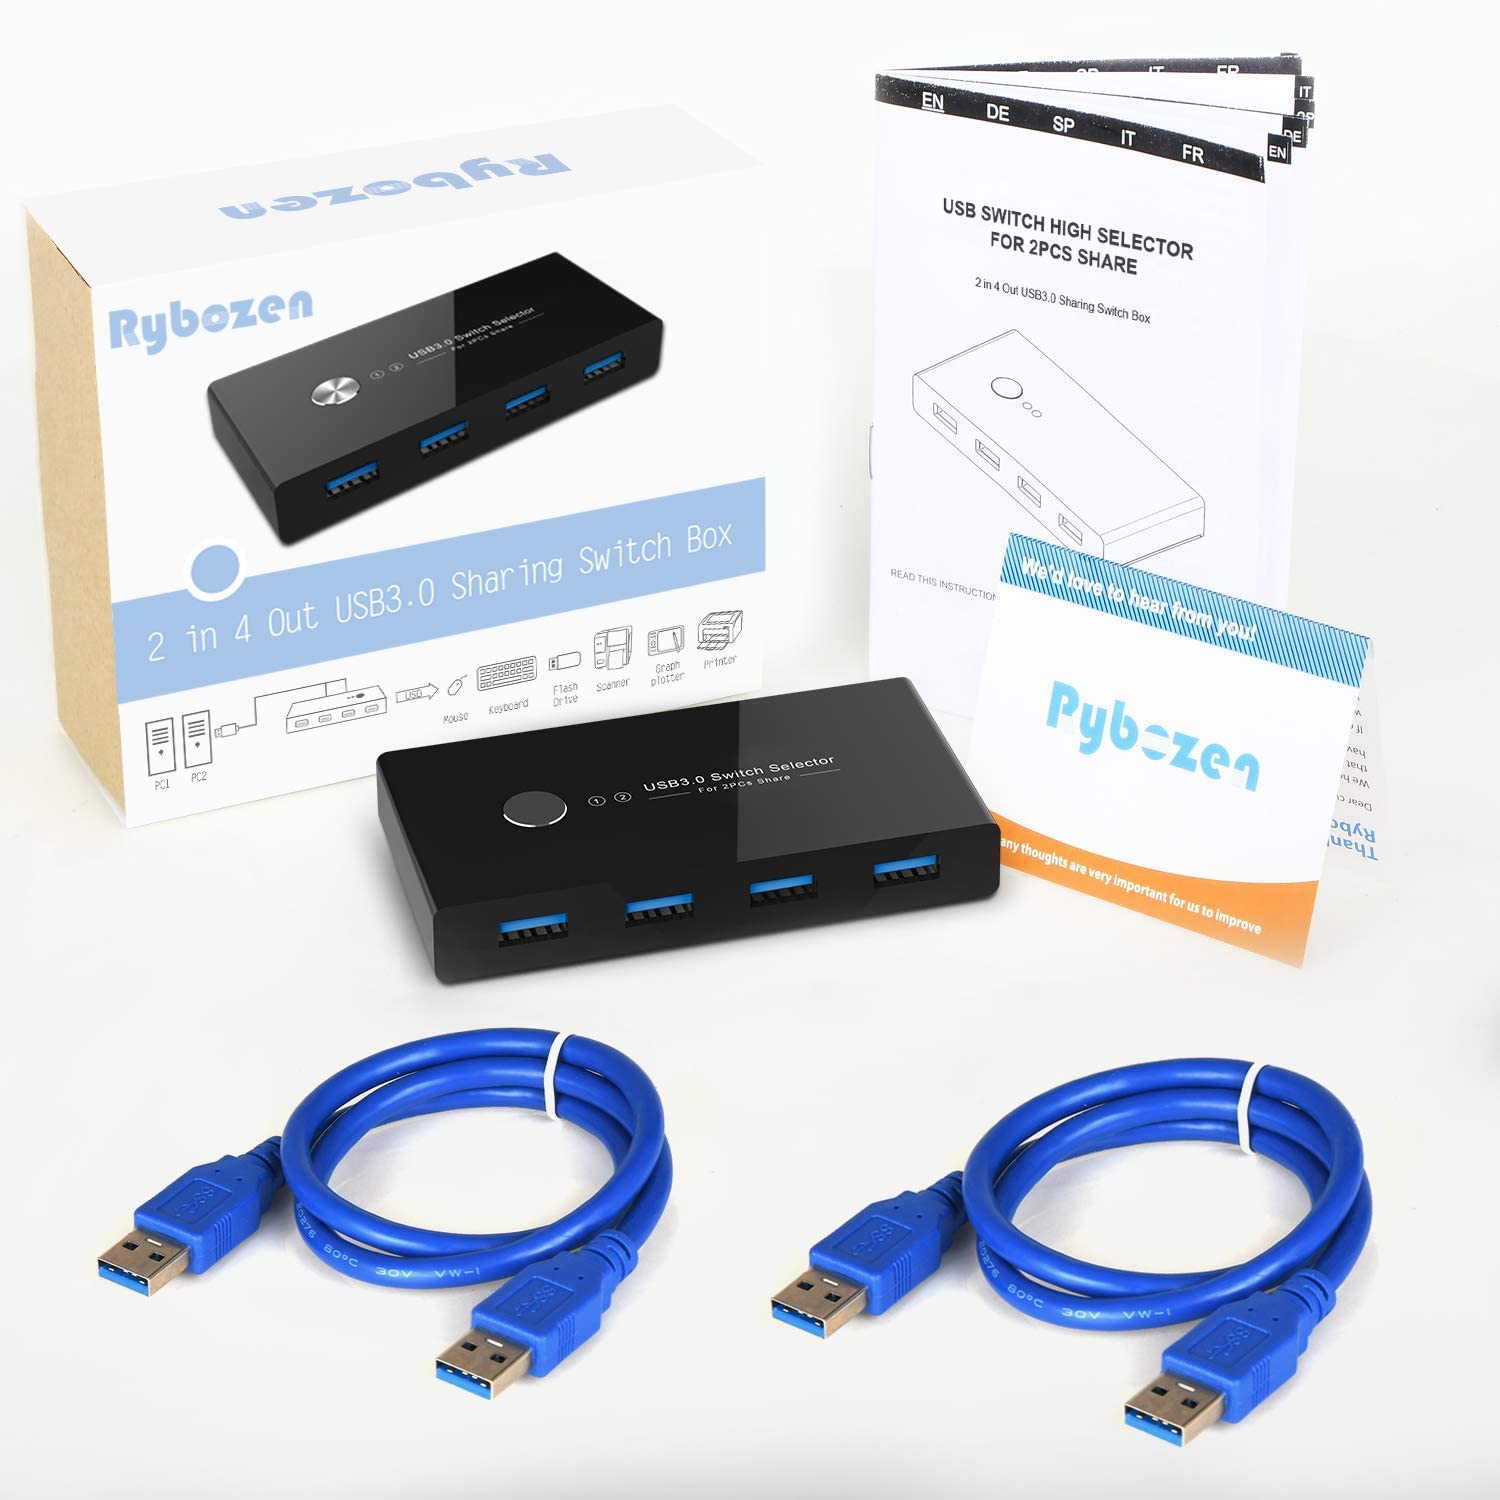 USB 3.0 Switch Selector,KVM Switch Adapter 2 Computer Sharing 4 USB Devices